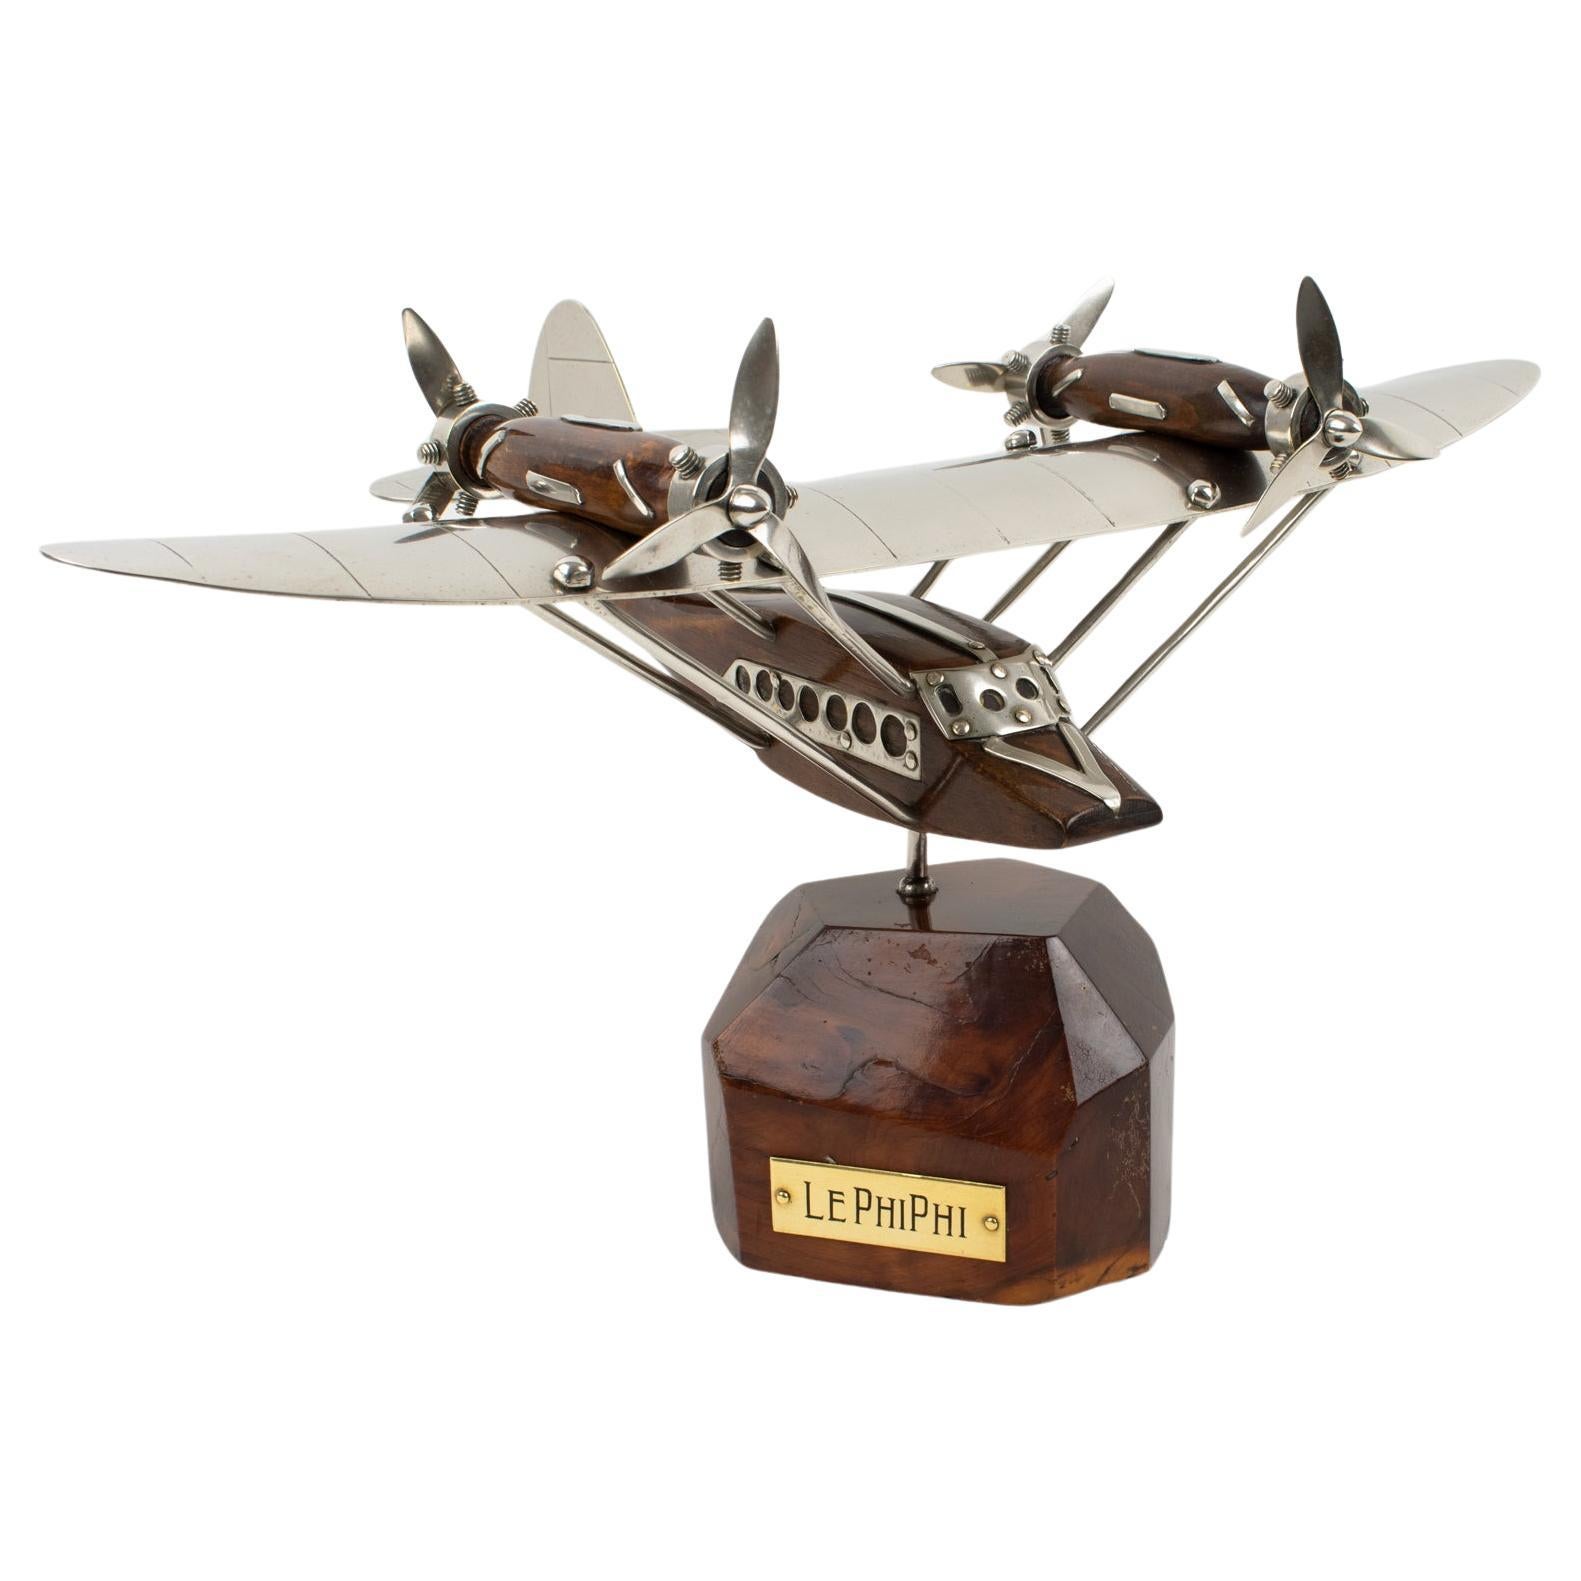 Art Deco Wood and Chrome Airplane SeaPlane Aviation Model, France 1940s For Sale